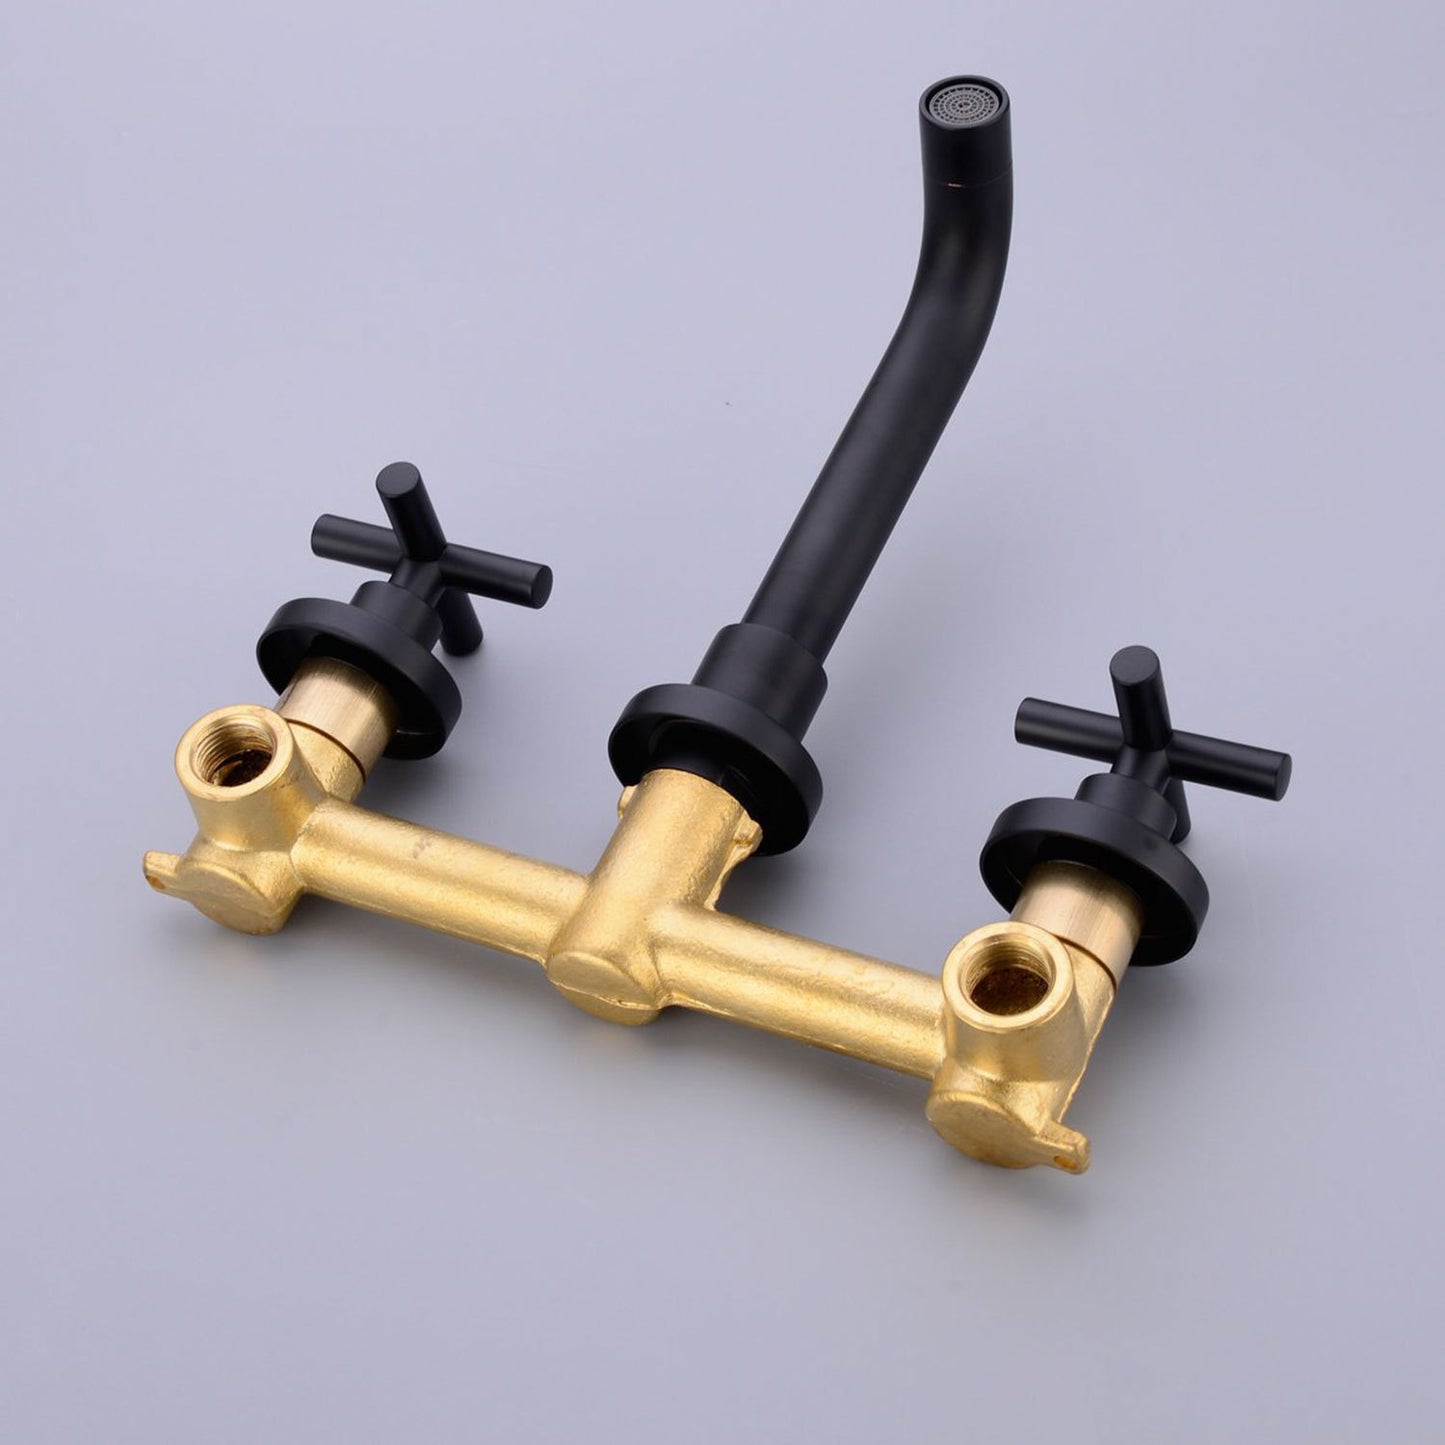 Modern Black Brass Bathroom Sink Faucet with Wall Mount